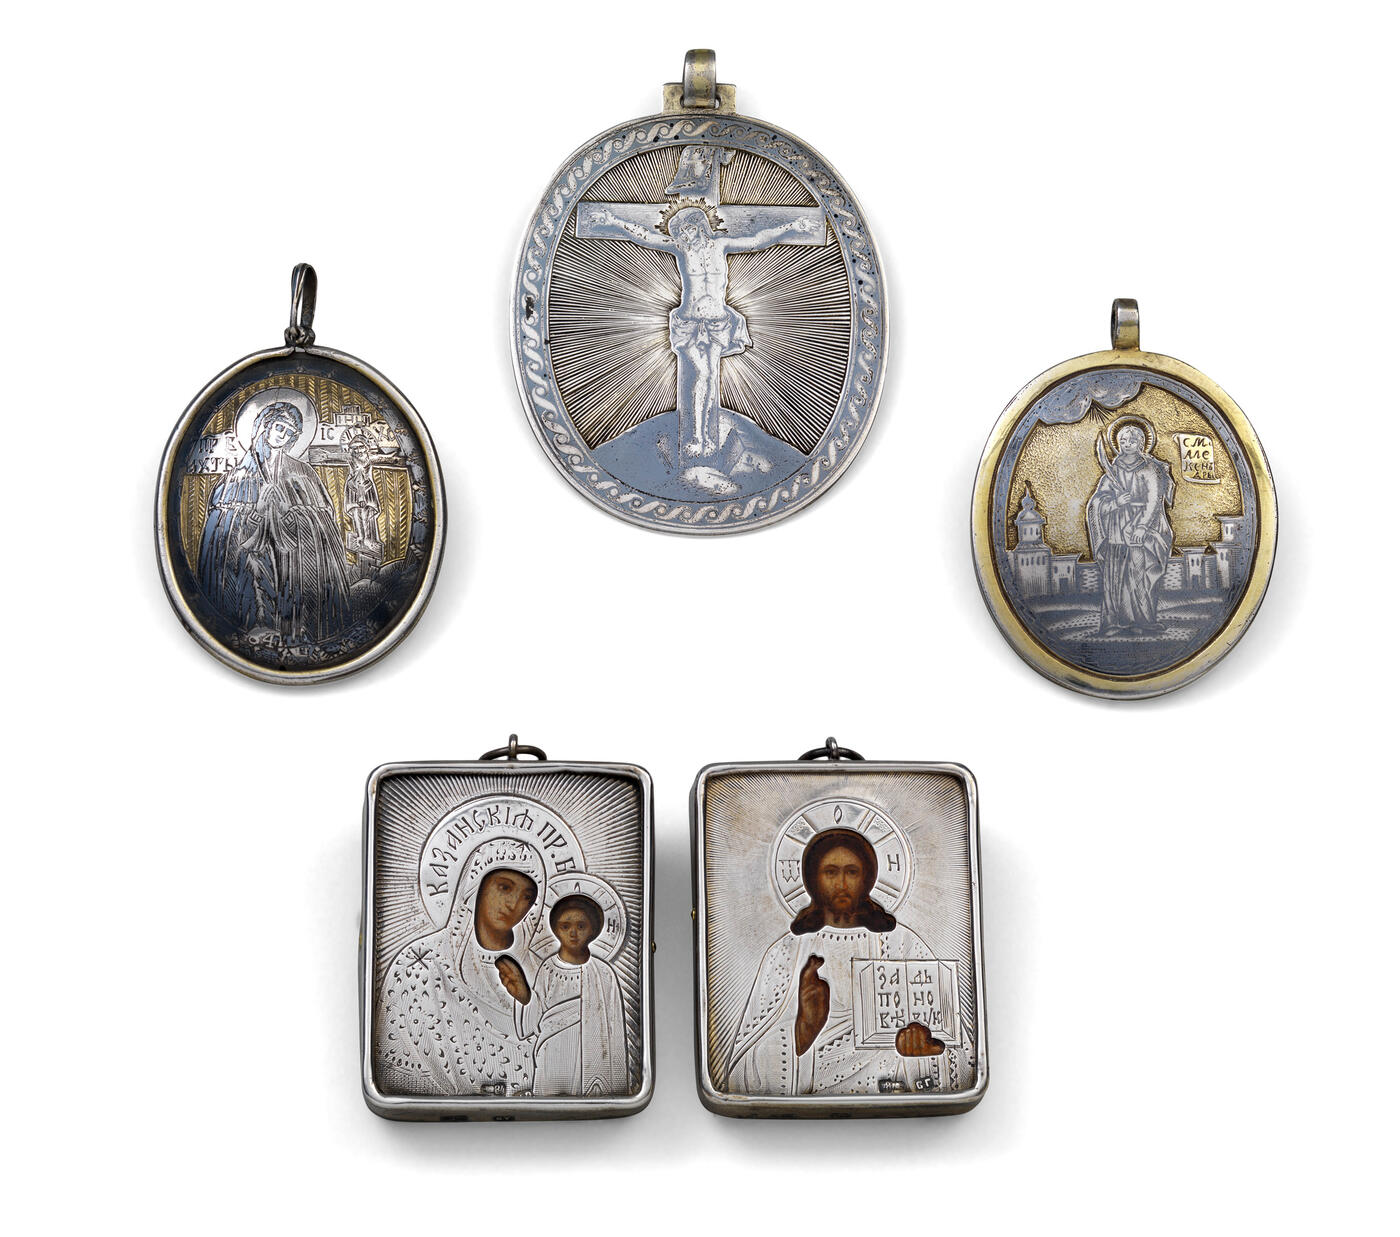 MEDALLIONS CIRCA 1800, LARGER DATED 1814, WEDDING ICONS STAMPED WITH MAKER'S MARKS SG IN CYRILLIC, MOSCOW, 1908-1917, 84 STANDARD